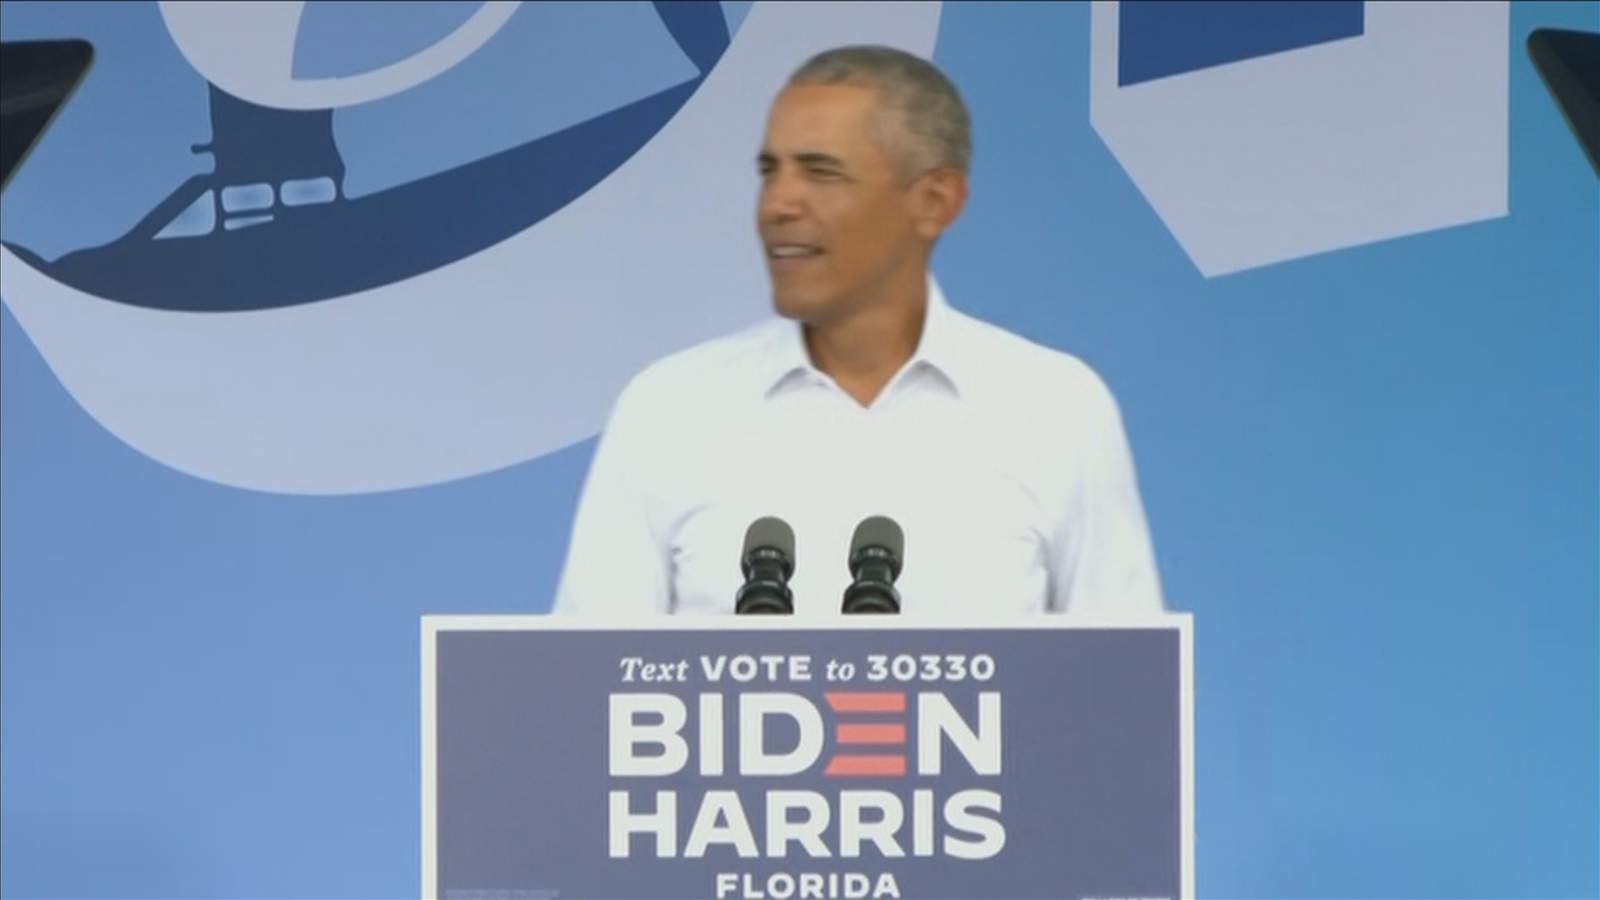 Former President Barack Obama will campaign for Joe Biden in South Florida on Monday